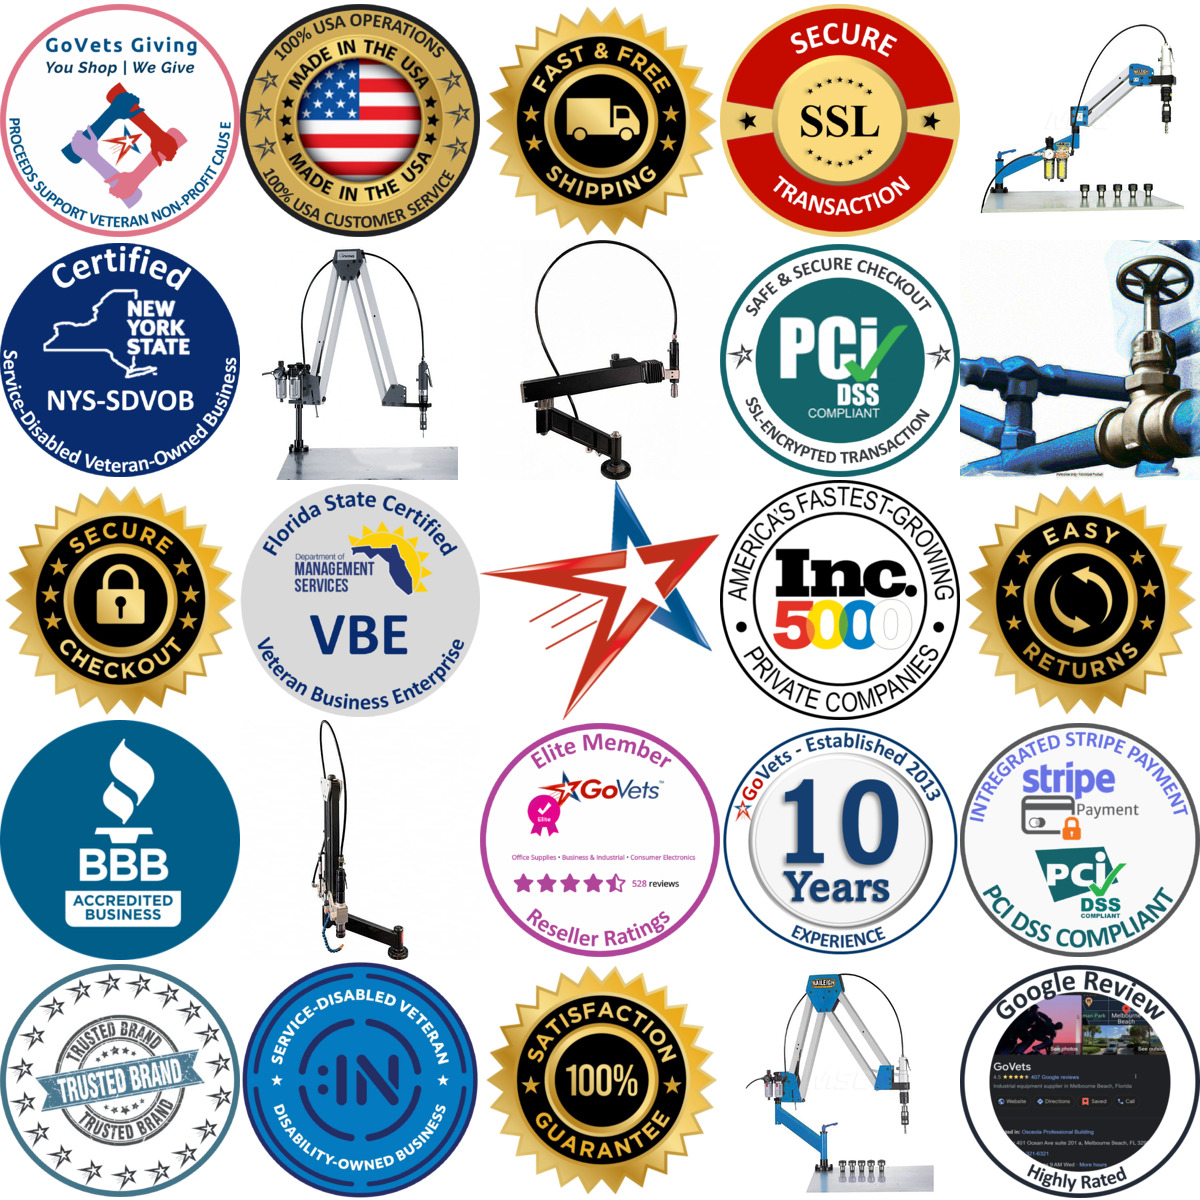 A selection of Tapping Arms products on GoVets